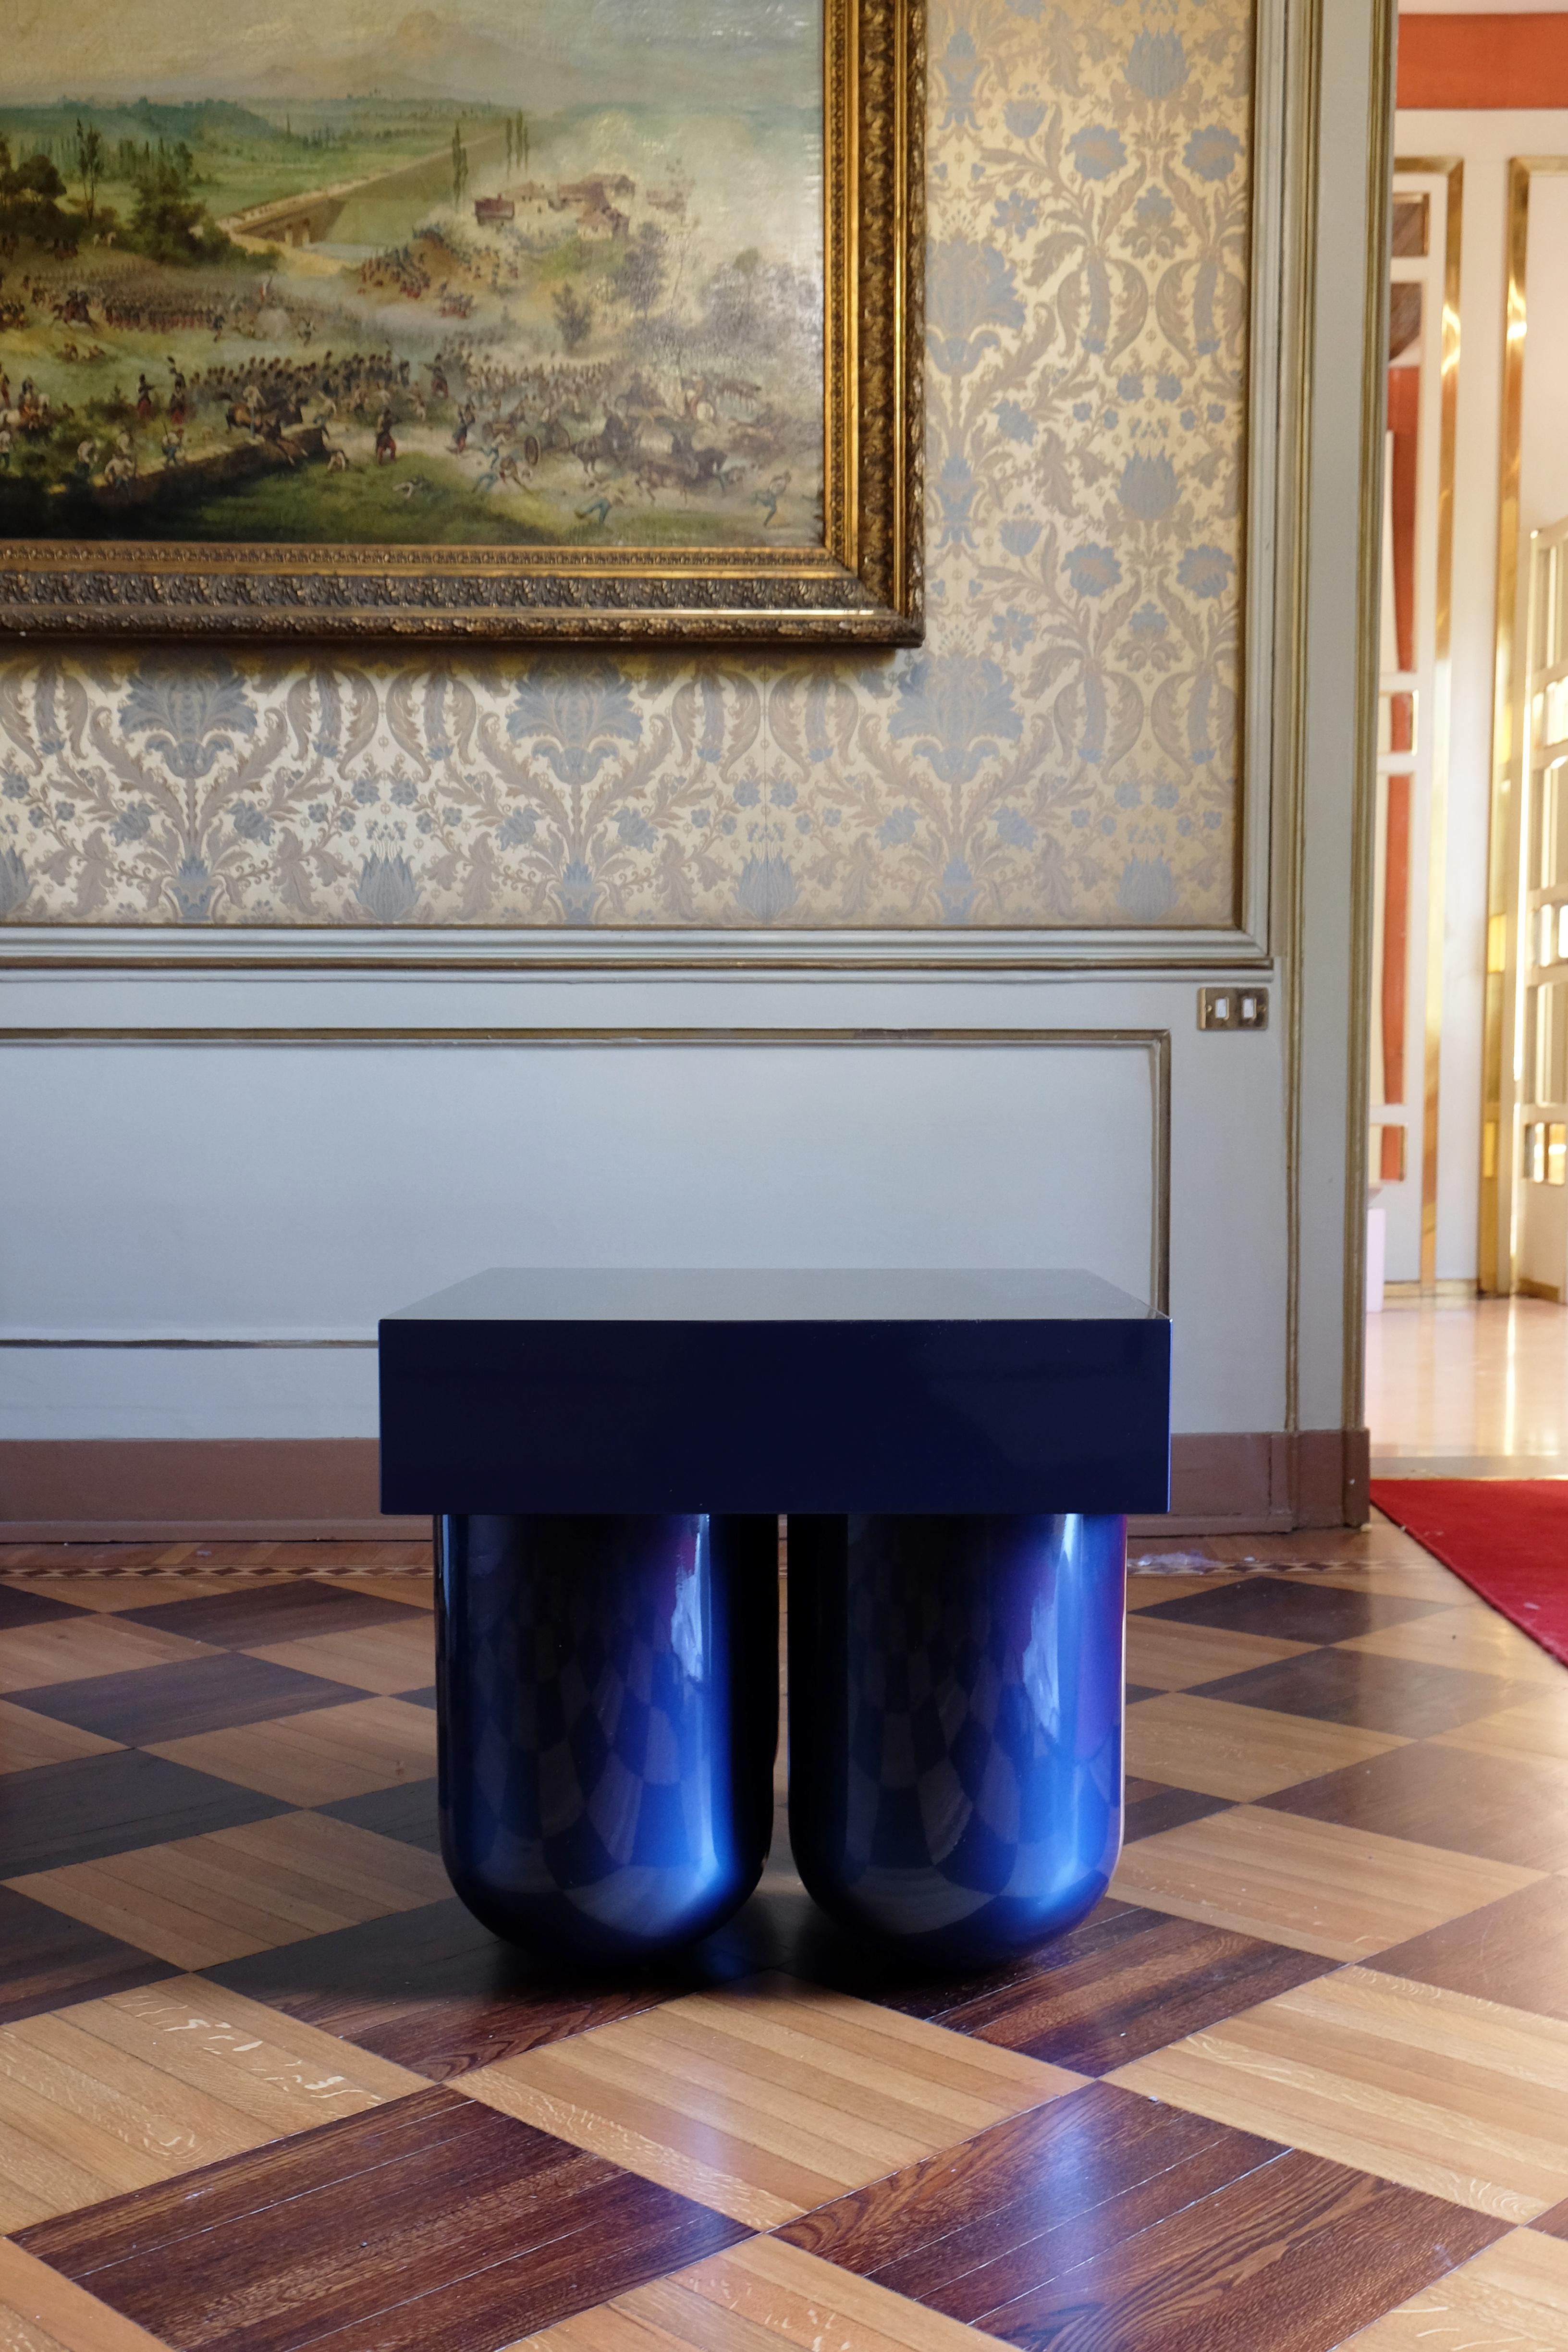 Blue carved wood set no. 5 tables by Müsing-Sellés
Dimensions: W 60 x D 60 x H 60 cm
Materials: Carved wood, high gloss car-paint metallic lacquer

Color finish options: Maroon or red gradient
 Indigo or blue gradient
Custom color (additional